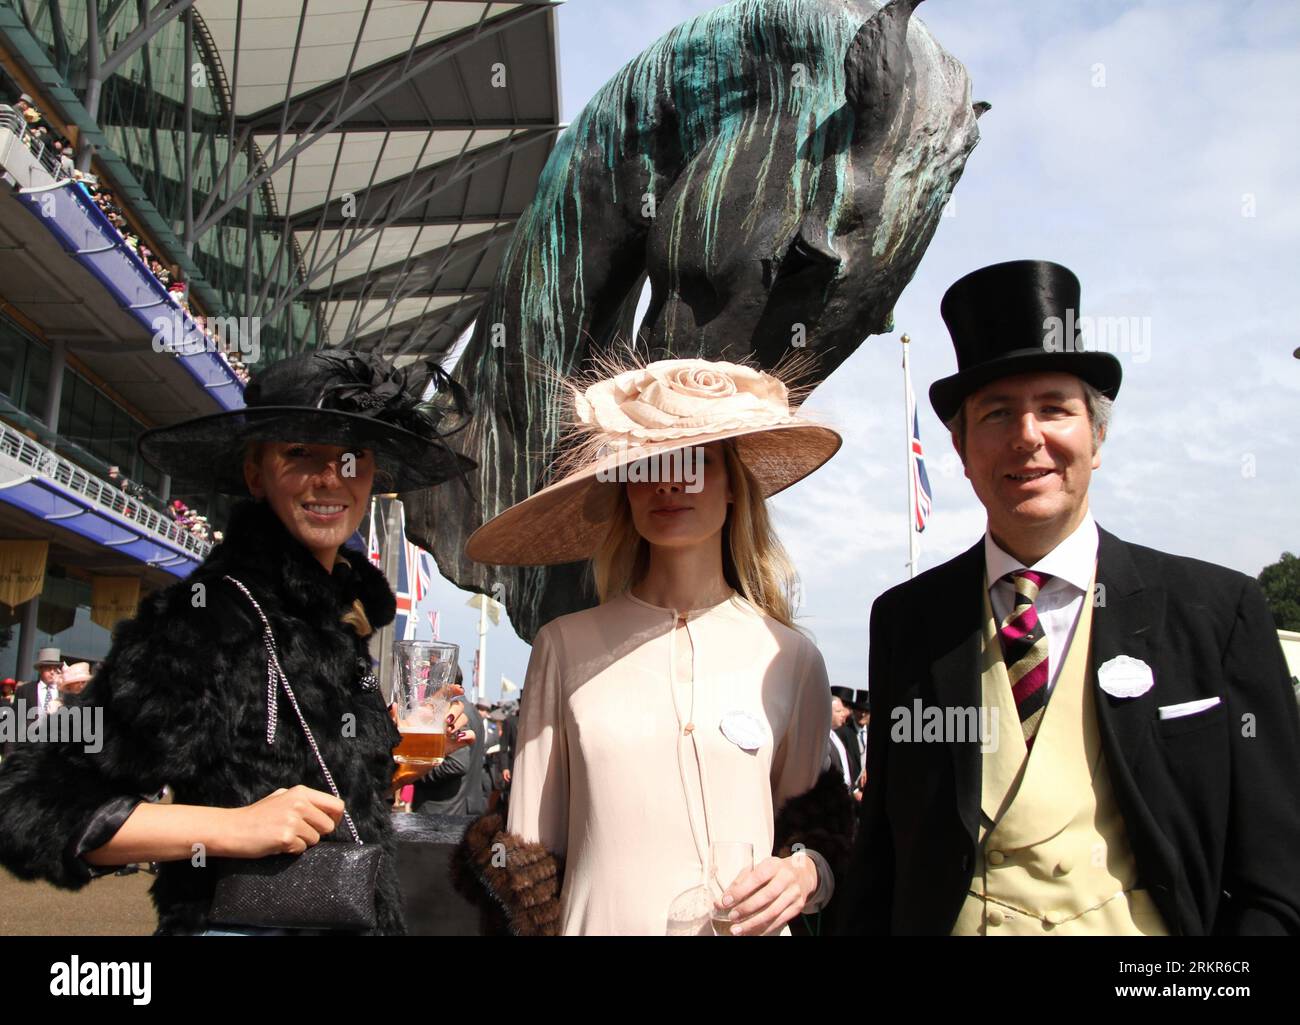 Bildnummer: 58133968  Datum: 21.06.2012  Copyright: imago/Xinhua (120622) -- London, June 21, 2012 (Xinhua) -- Women wearing hats pose with a man for photo on the Royal Ascot, in Ascot, Berkshire, UK, June 21, 2012. Dated from 1711, the annual Royal Ascot week is one of Europe s most famous horse racing event. The Thursday in every Royal Ascot week is the traditional Ladies Day, on which spectating ladies specially wear beautiful hats for the Gold Cup race. (Xinhua/Zhang Yuenan) (zy) UK-ROYAL ASCOT-LADIES DAY PUBLICATIONxNOTxINxCHN Entertainment Galopp Royal Ascot Mode xjh x0x premiumd 2012 qu Stock Photo